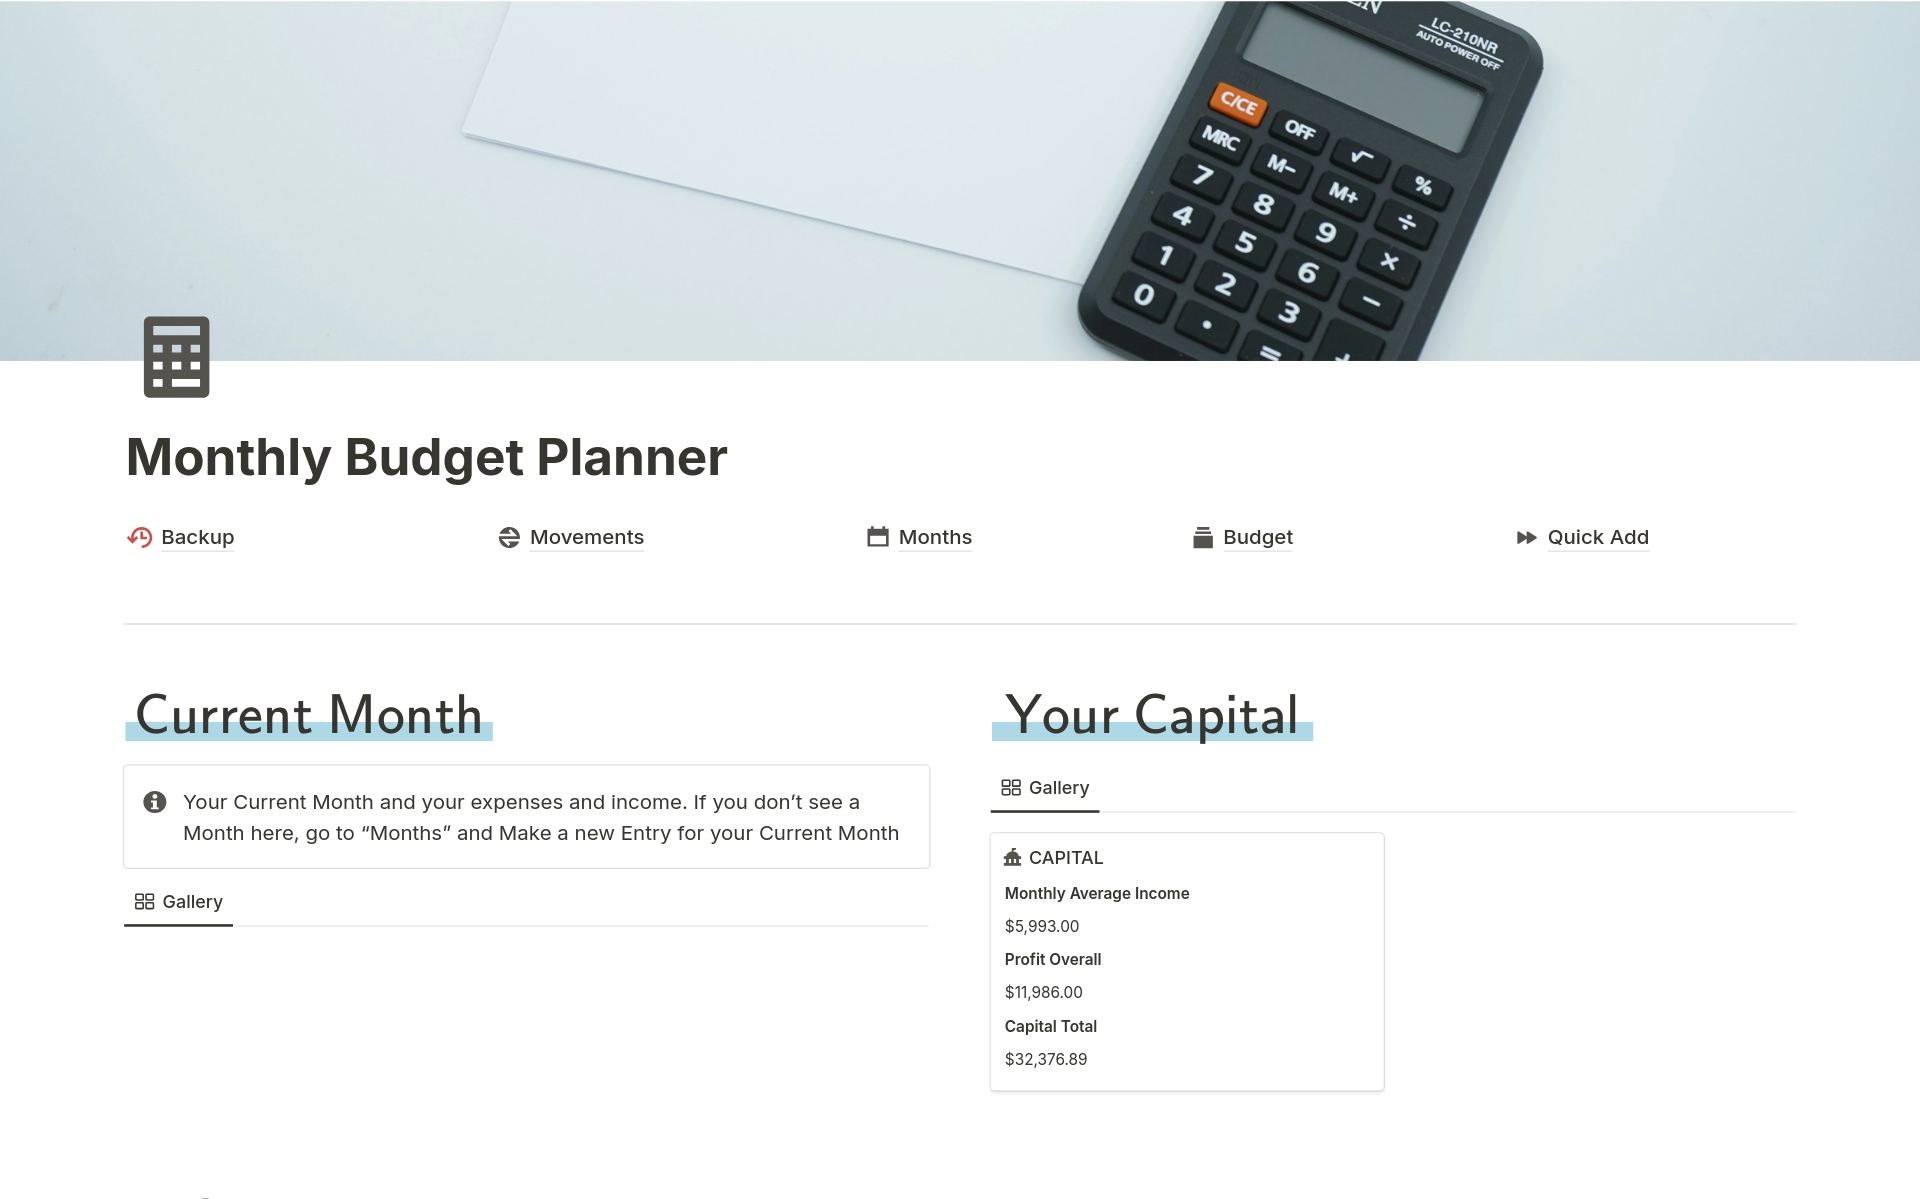 This tracker helps people plan their month so they don't end up in debt at the end of the month.